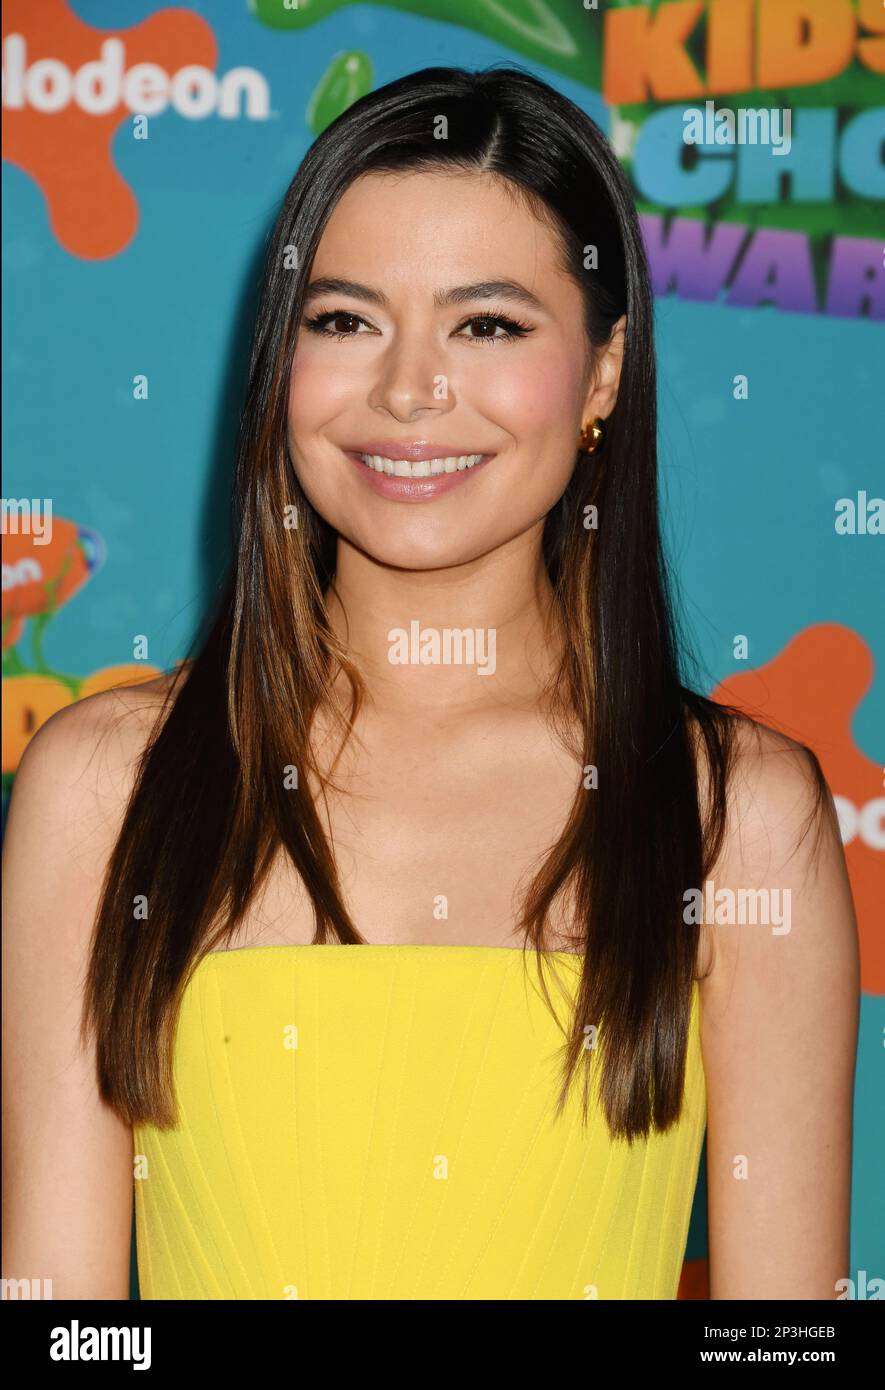 Los Angeles, California, USA. 04th Mar, 2023. Miranda Cosgrove attends Nickelodeon's 2023 Kids' Choice Awards at Microsoft Theater on March 04, 2023 in Los Angeles, California. Credit: Jeffrey Mayer/Jtm Photos/Media Punch/Alamy Live News Stock Photo